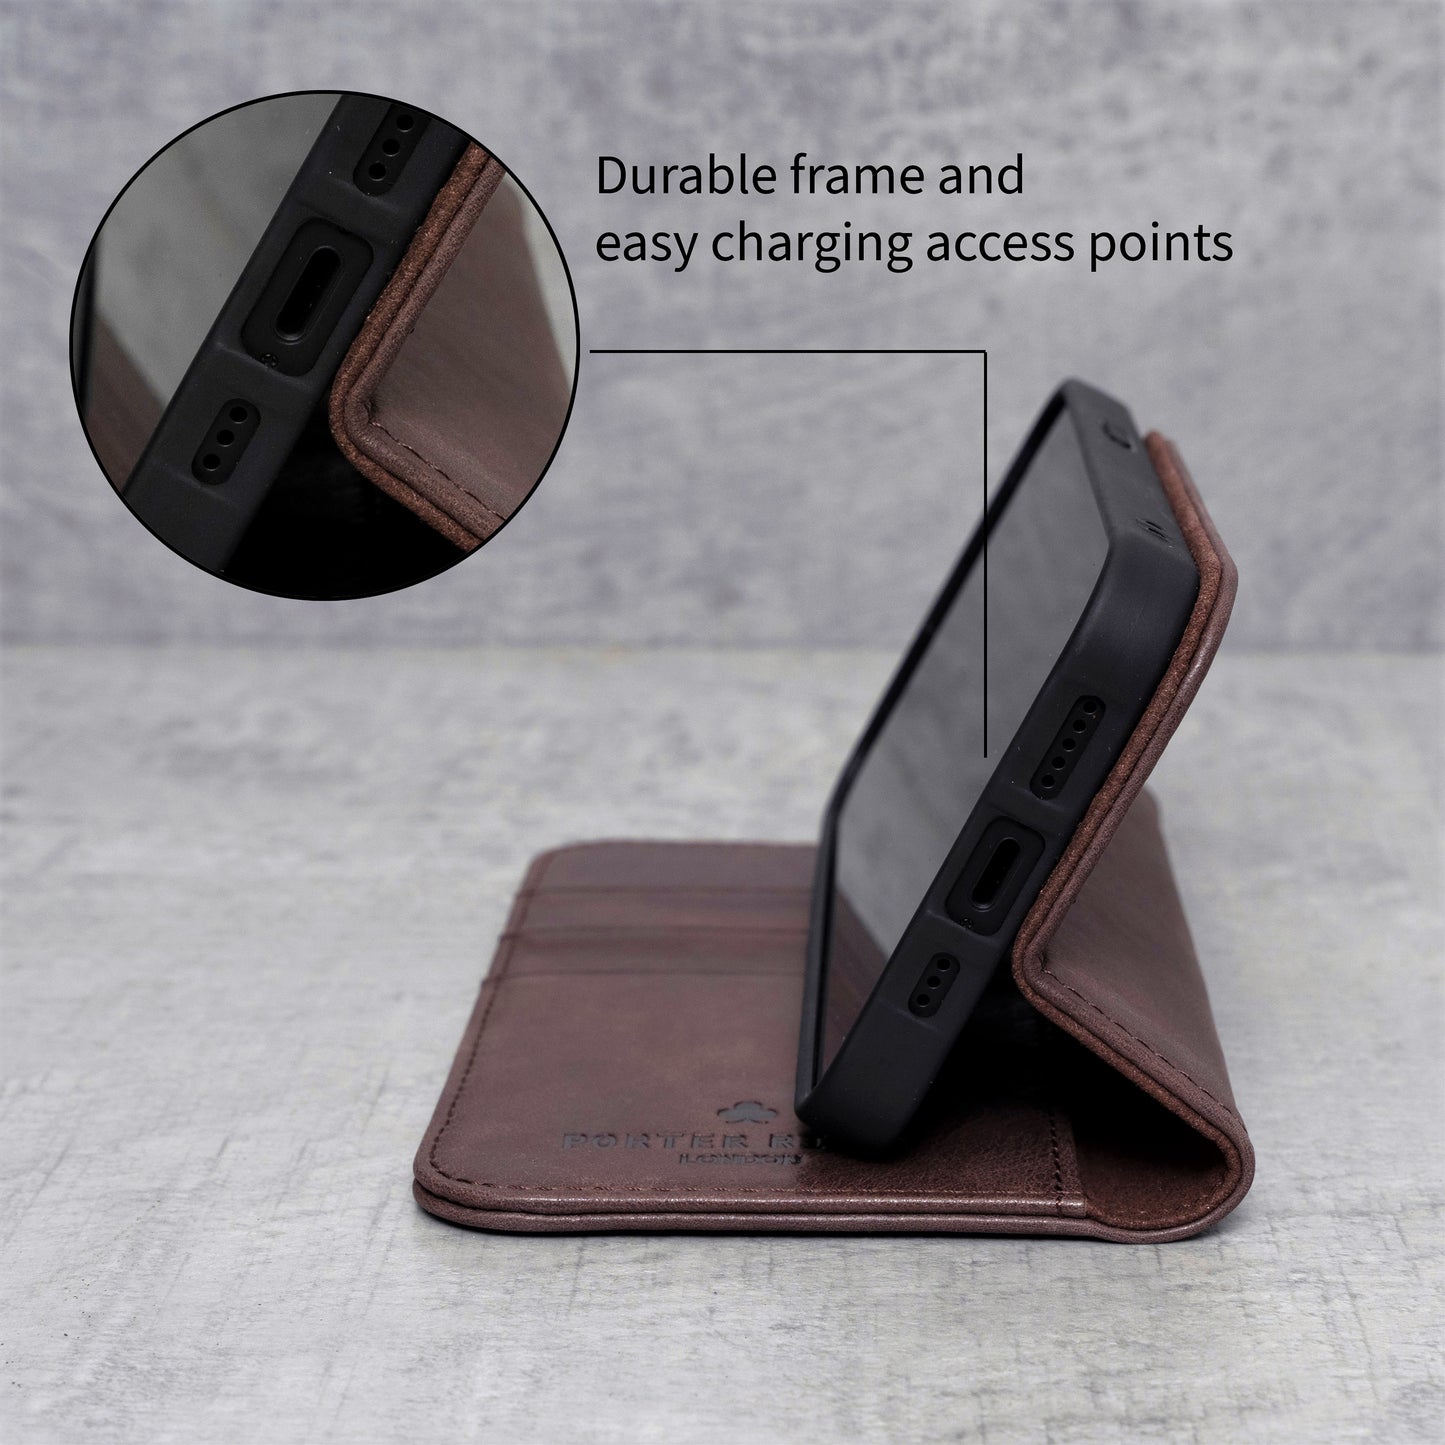 iPhone 12 Leather Case. Premium Slim Genuine Leather Stand Case/Cover/Wallet (Chocolate Brown)